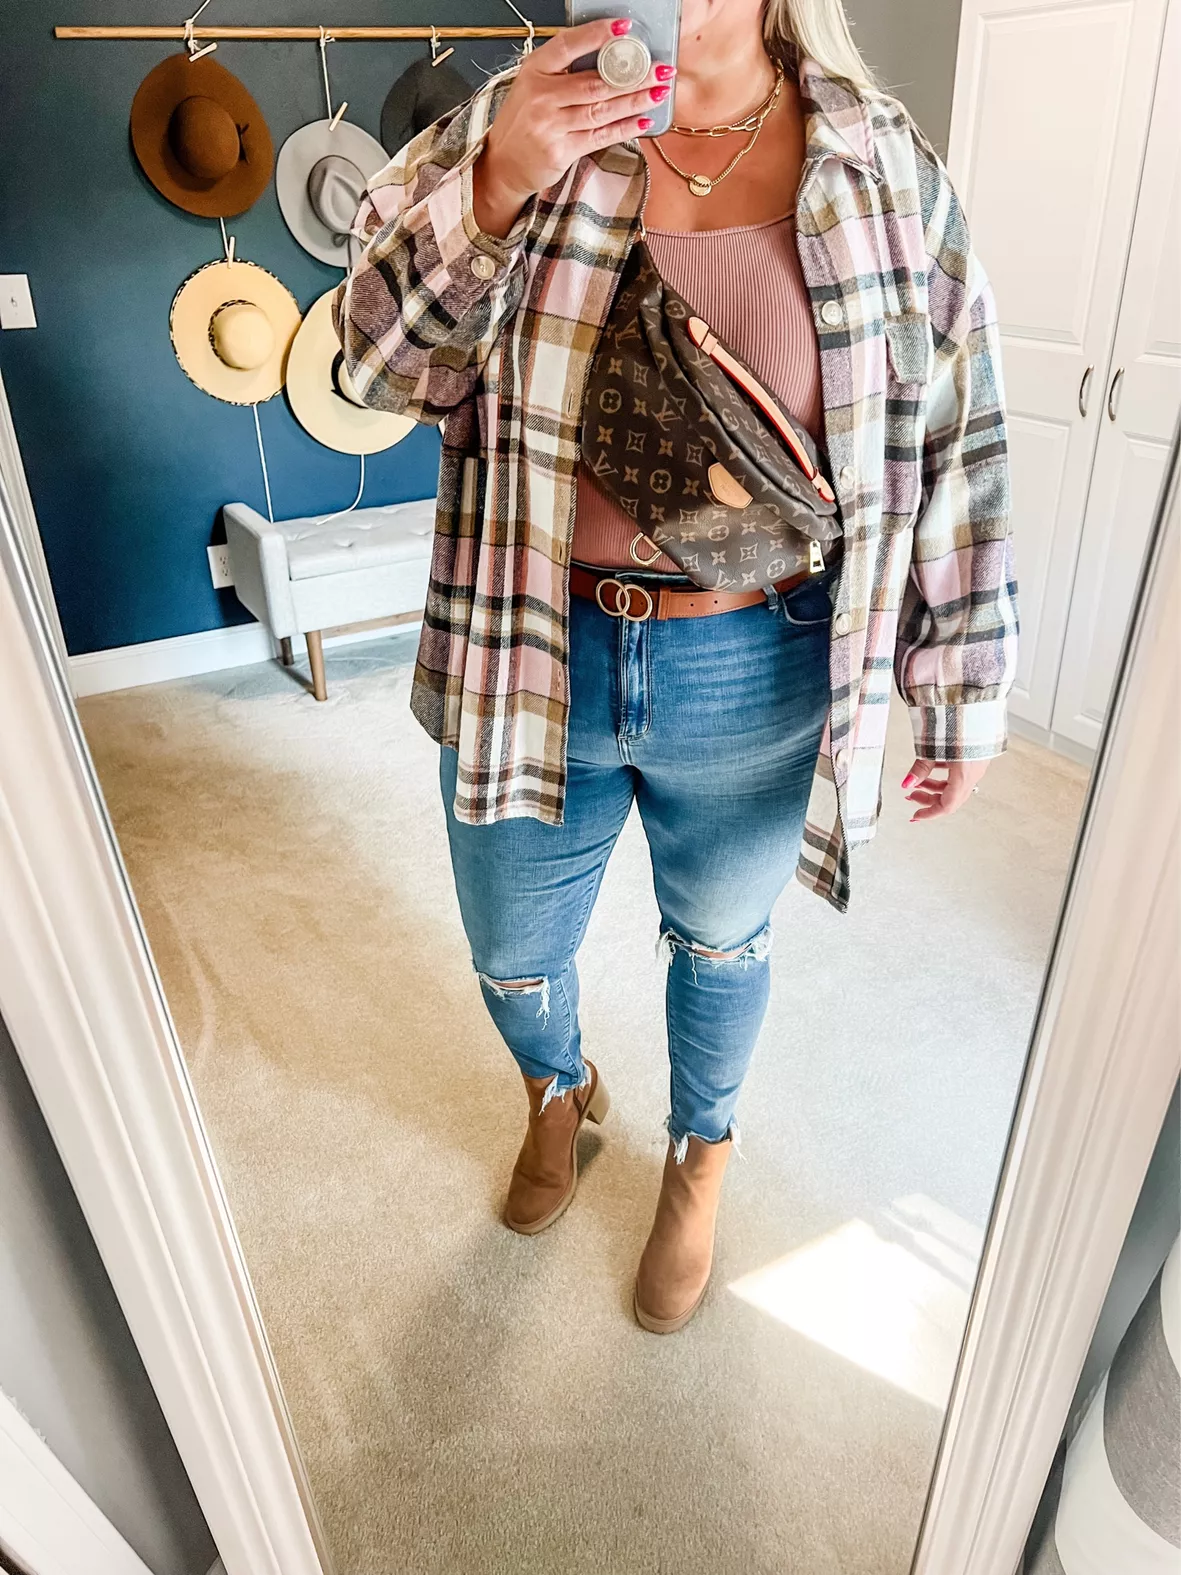 Stylish Fall Outfit with Louis Vuitton Bumbag, Jeans, and Ankle Boots